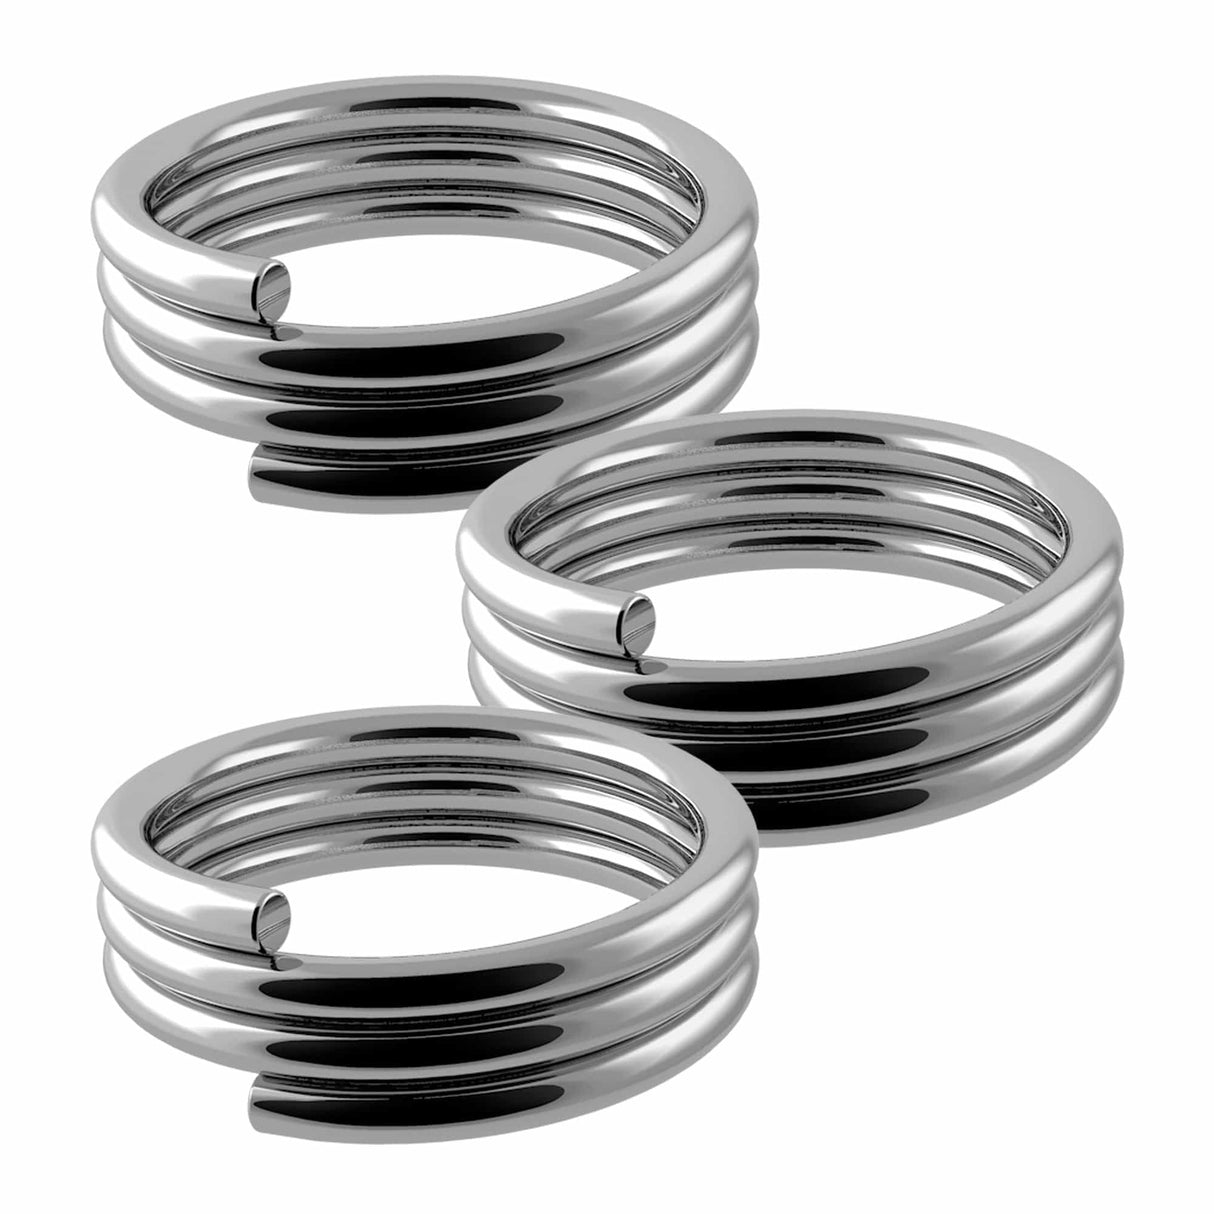 Designa Springs - for use with Nylon Shafts - 20 Sets (60) Silver